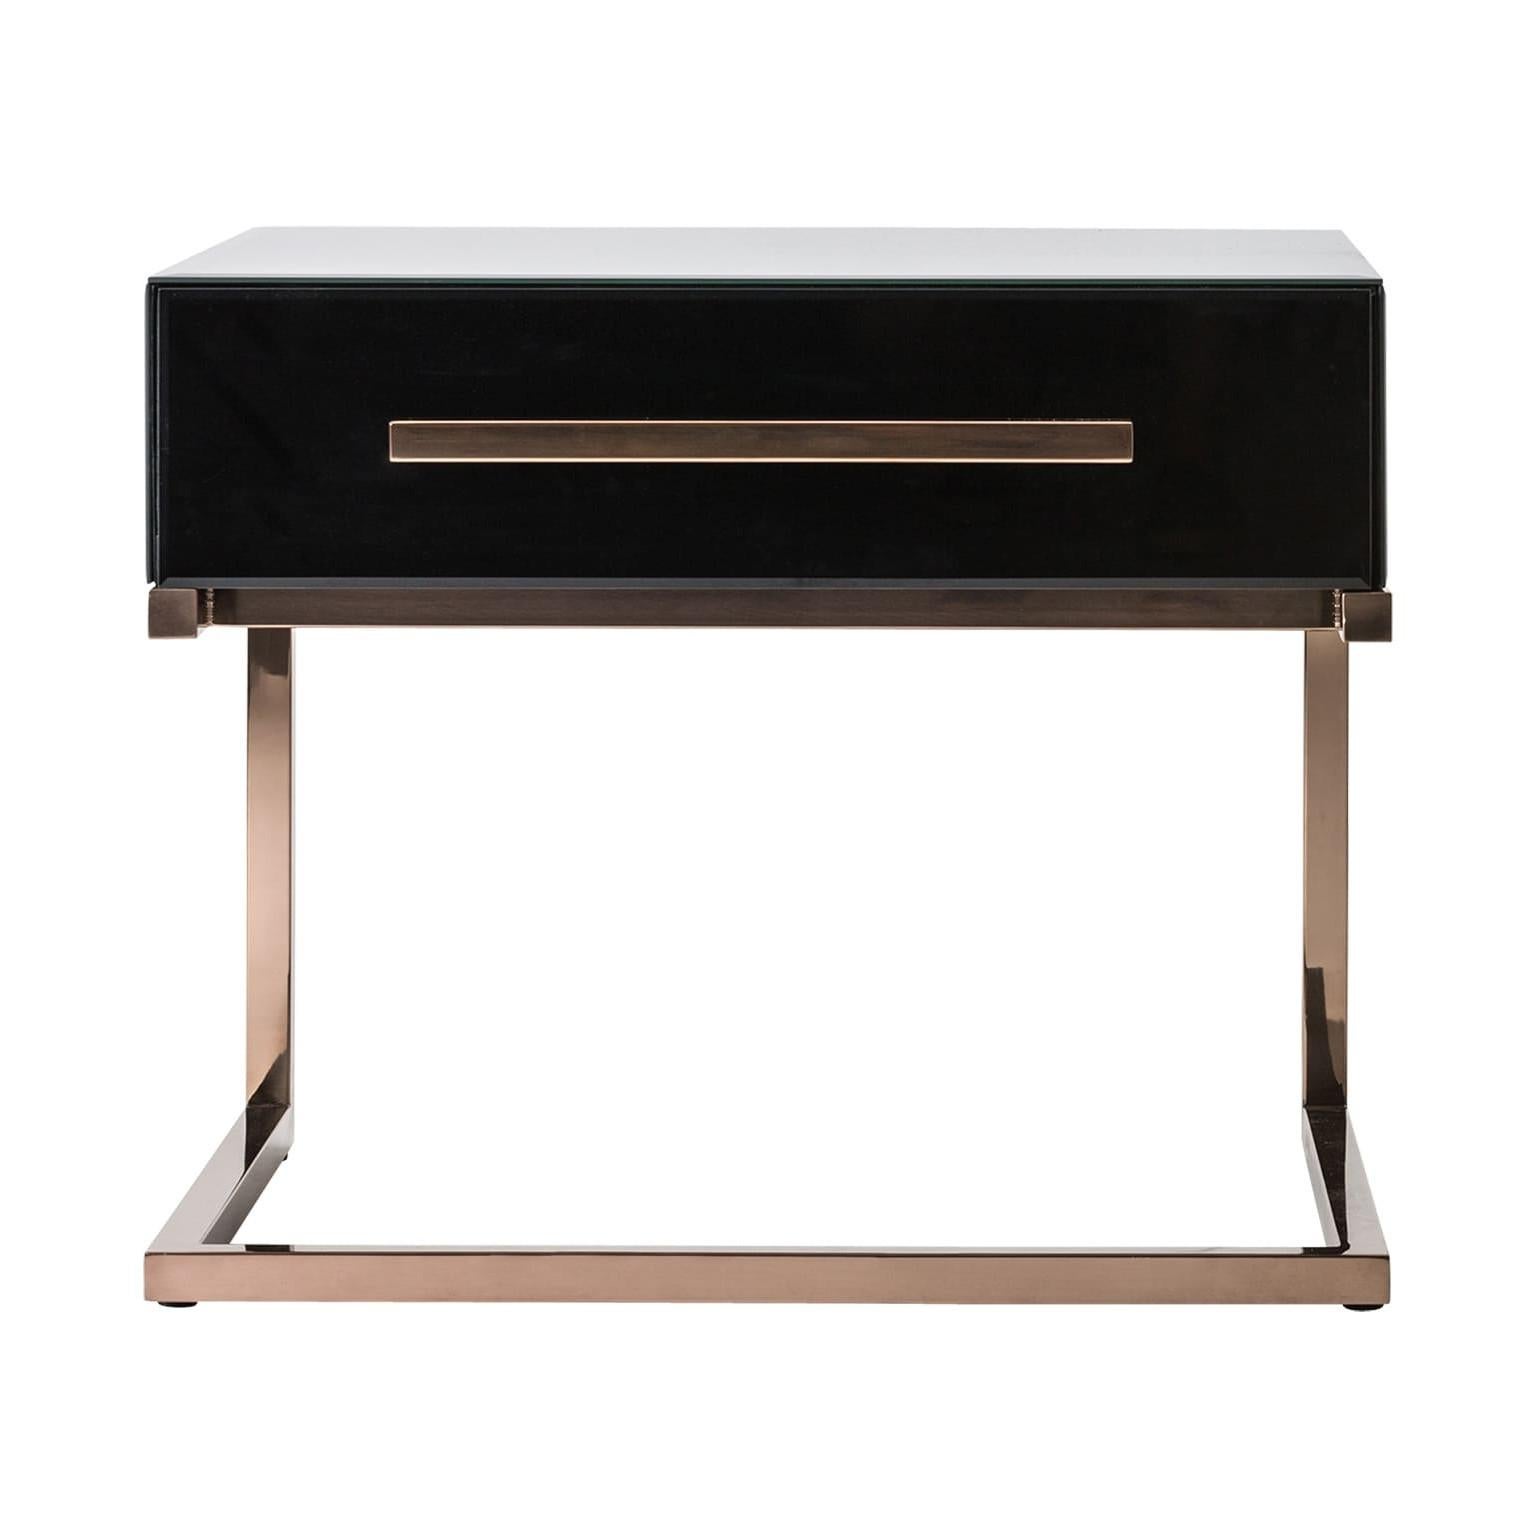 Black bevelled glass mirror and coopered stainless steel pair of bedside tables or night stands composed of a cantilever design cooper base, matching handle for the drawer and all in adorned with black bevelled glass mirror.